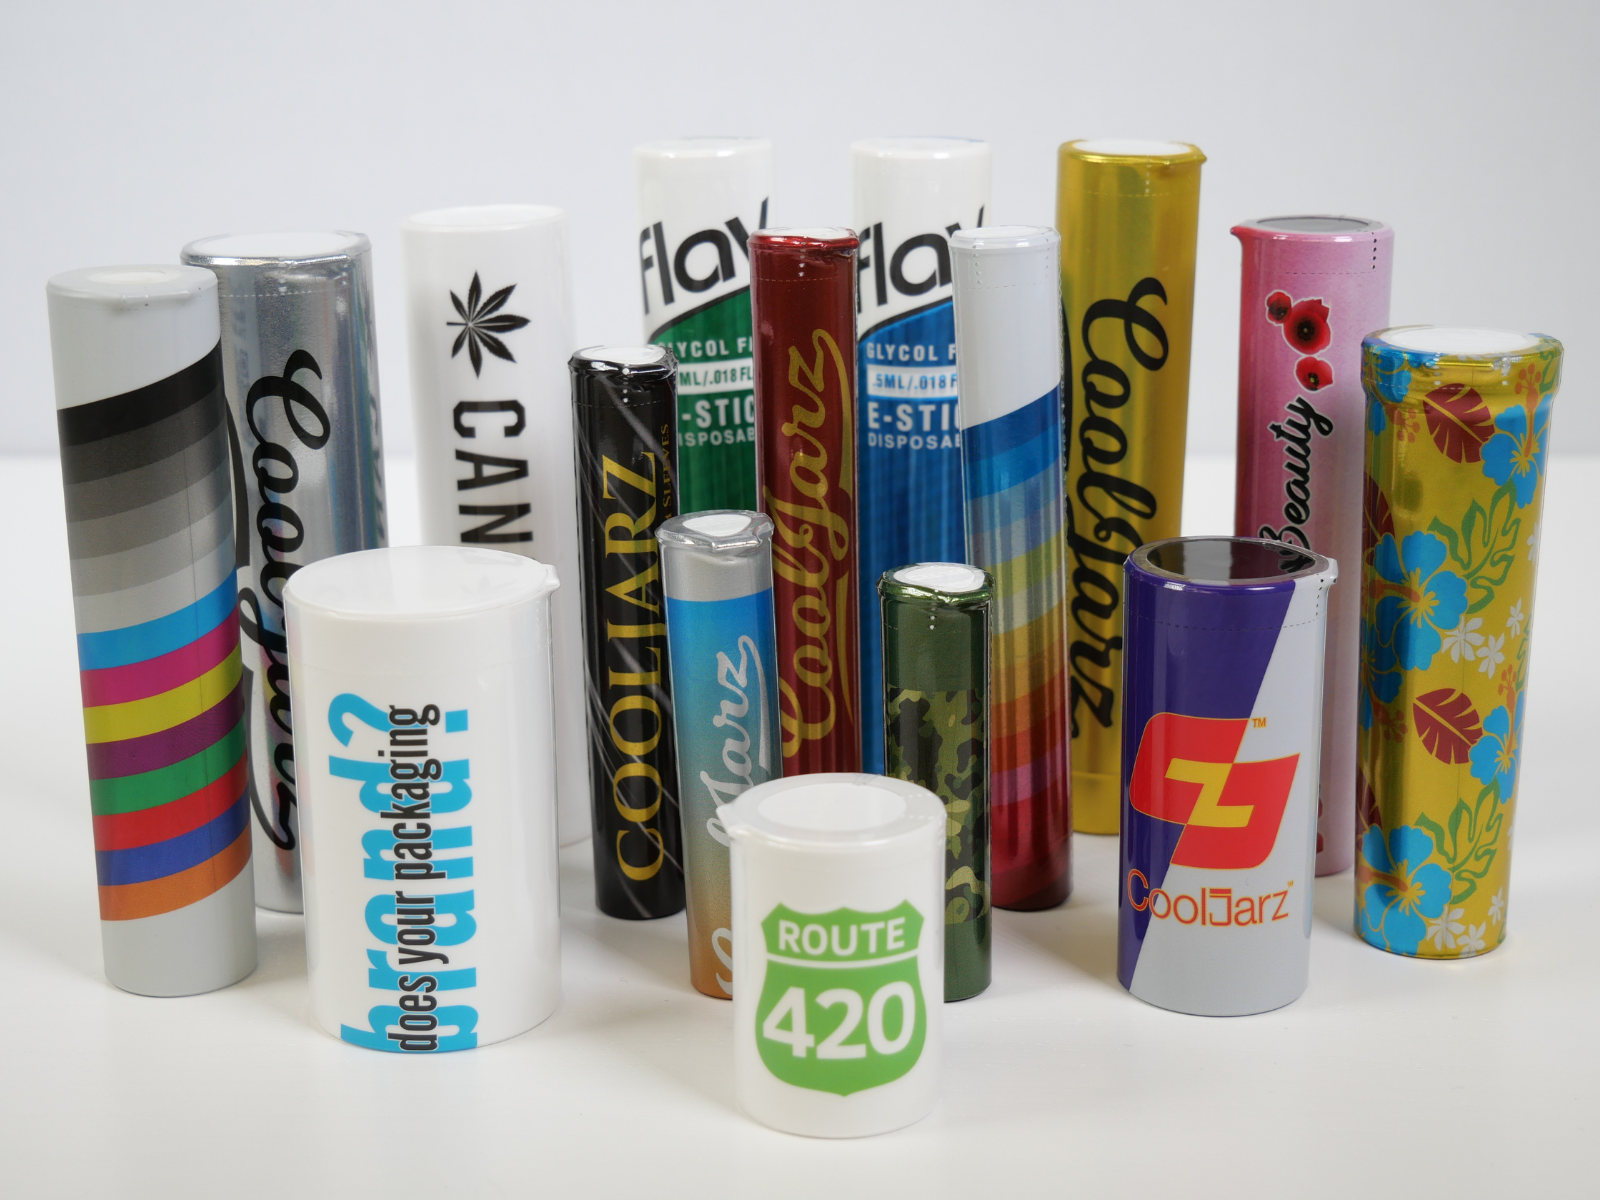 pre roll tubes and flower containers with branded labels